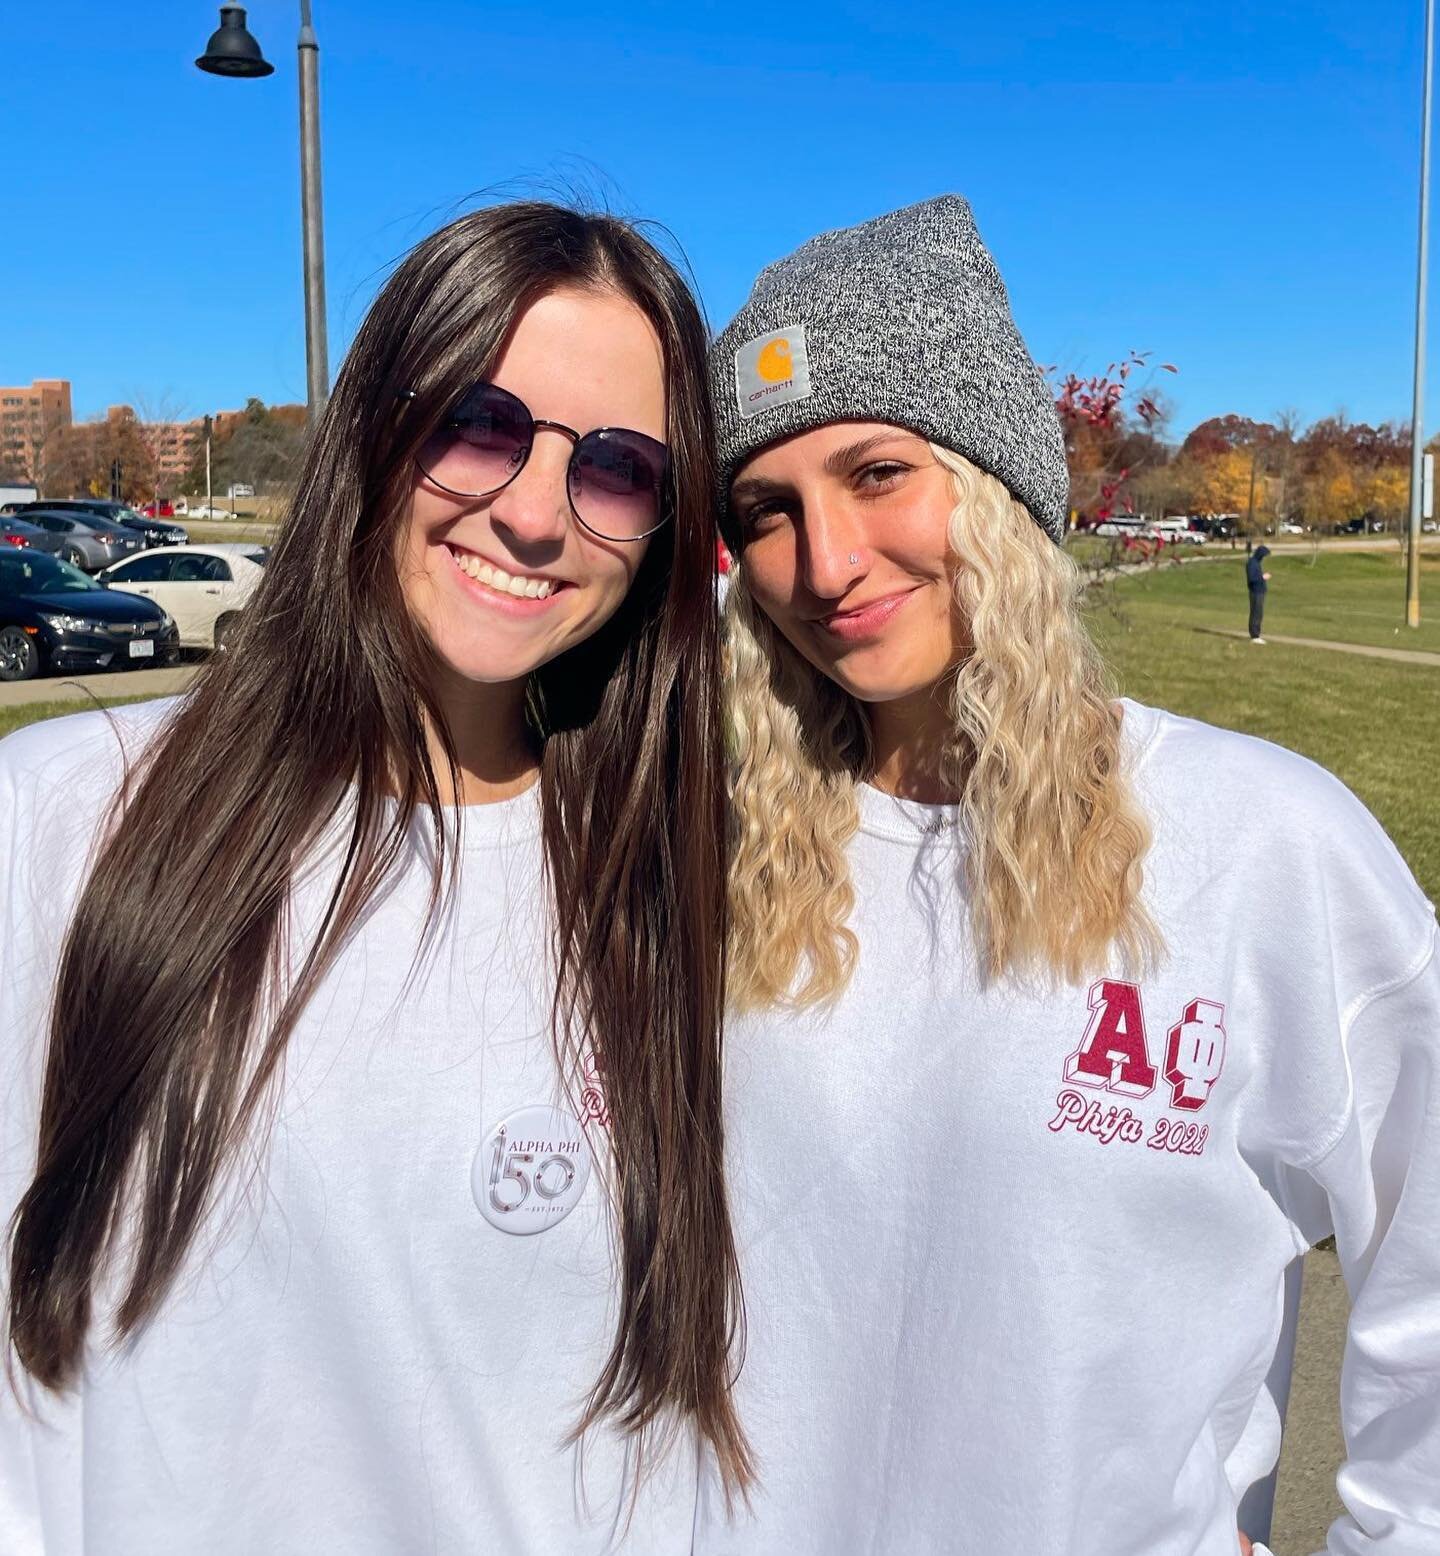 We had the best time at Alpha Phifa today!⚽️🤍 Thank you to everyone who came and contributed to the Alpha Phi Foundation, helping us raise over $2000!👏 Congratulations to our winners, @sigepkent and @ksudeltagamma !✨
#KSUAlphaPhi #WeAre1063